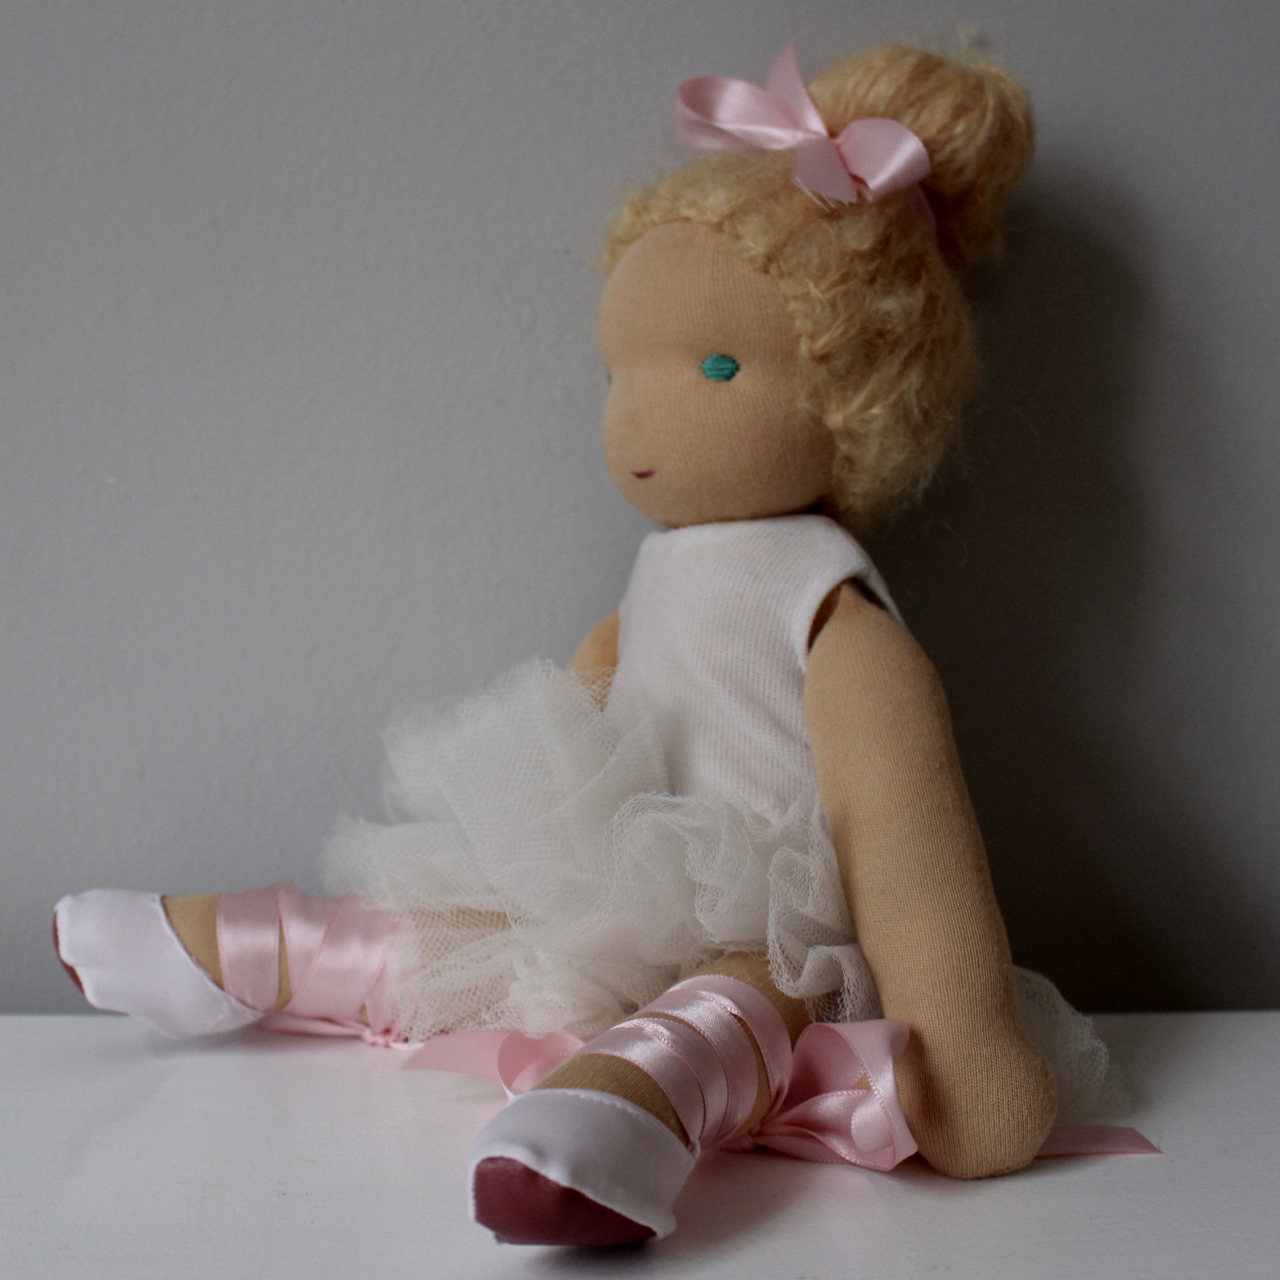 Ballet Waldorf doll with ballet outfit and ballet shoes